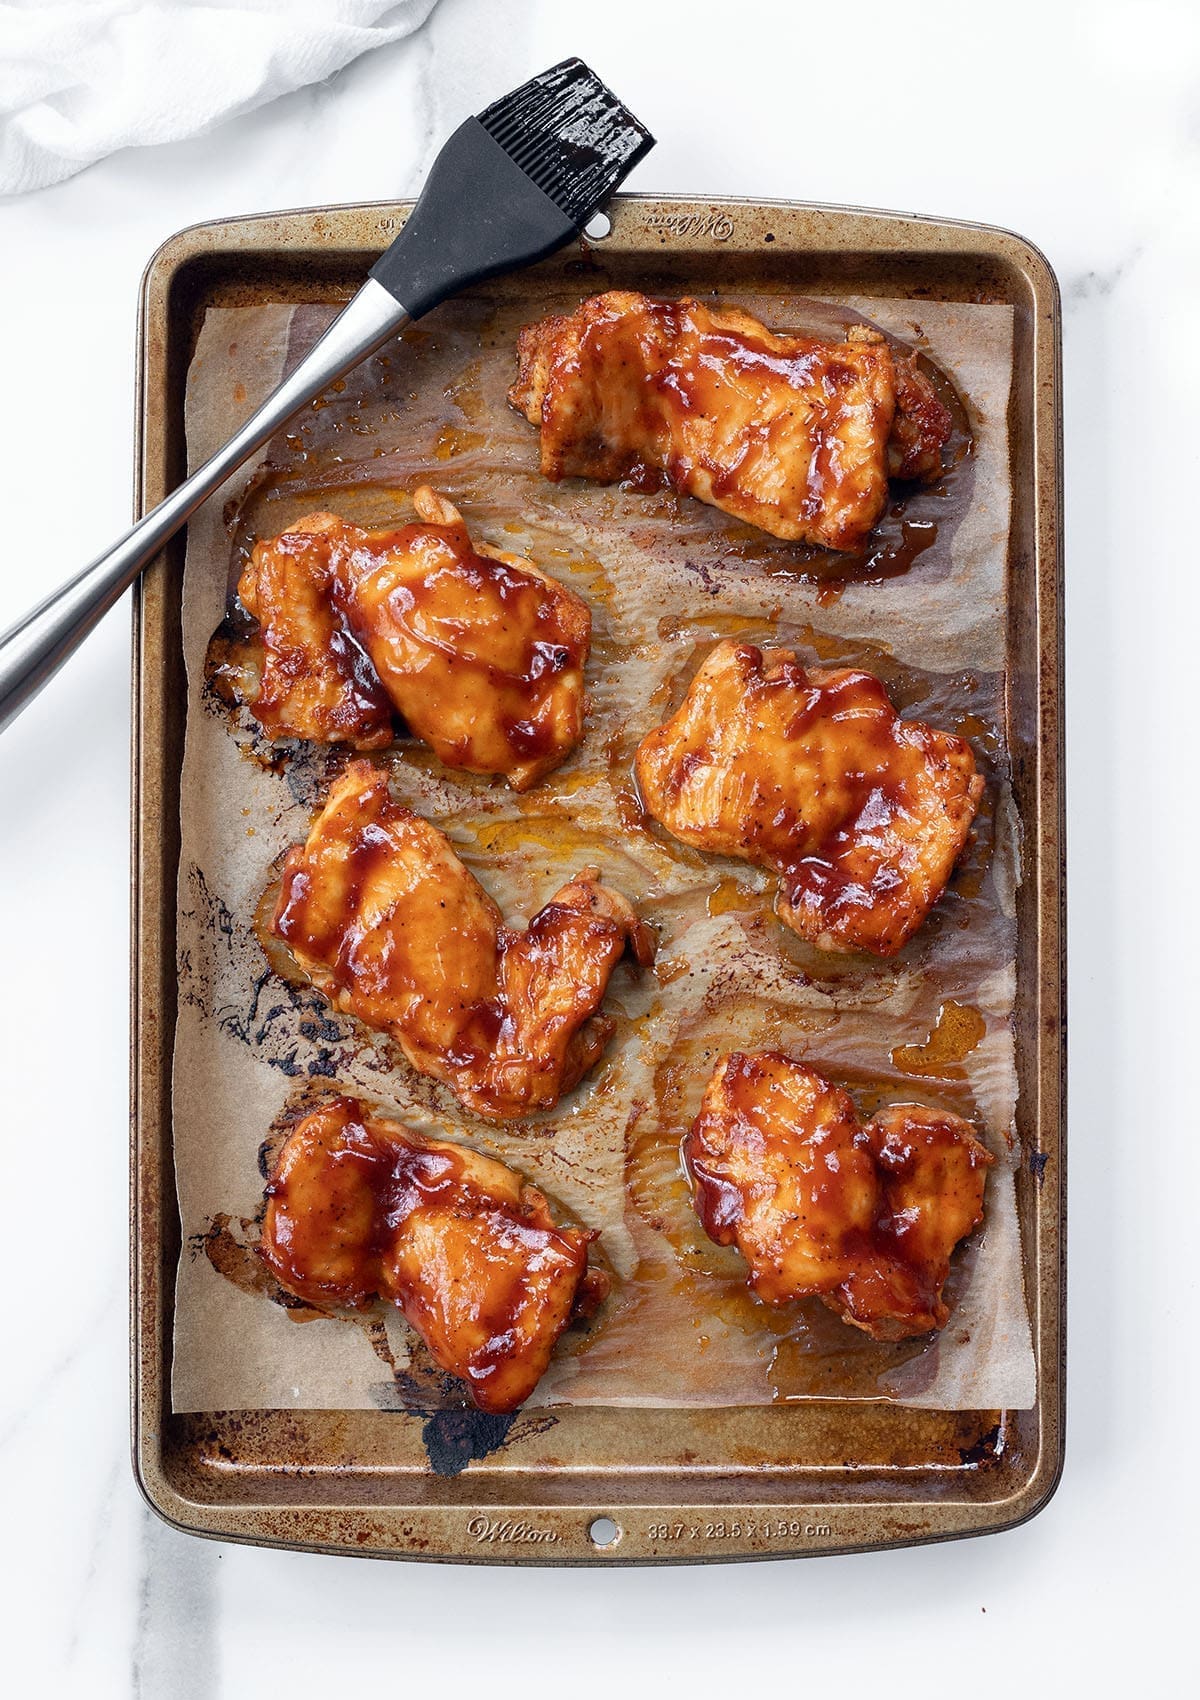 BBQ baked chicken on a baking sheet.